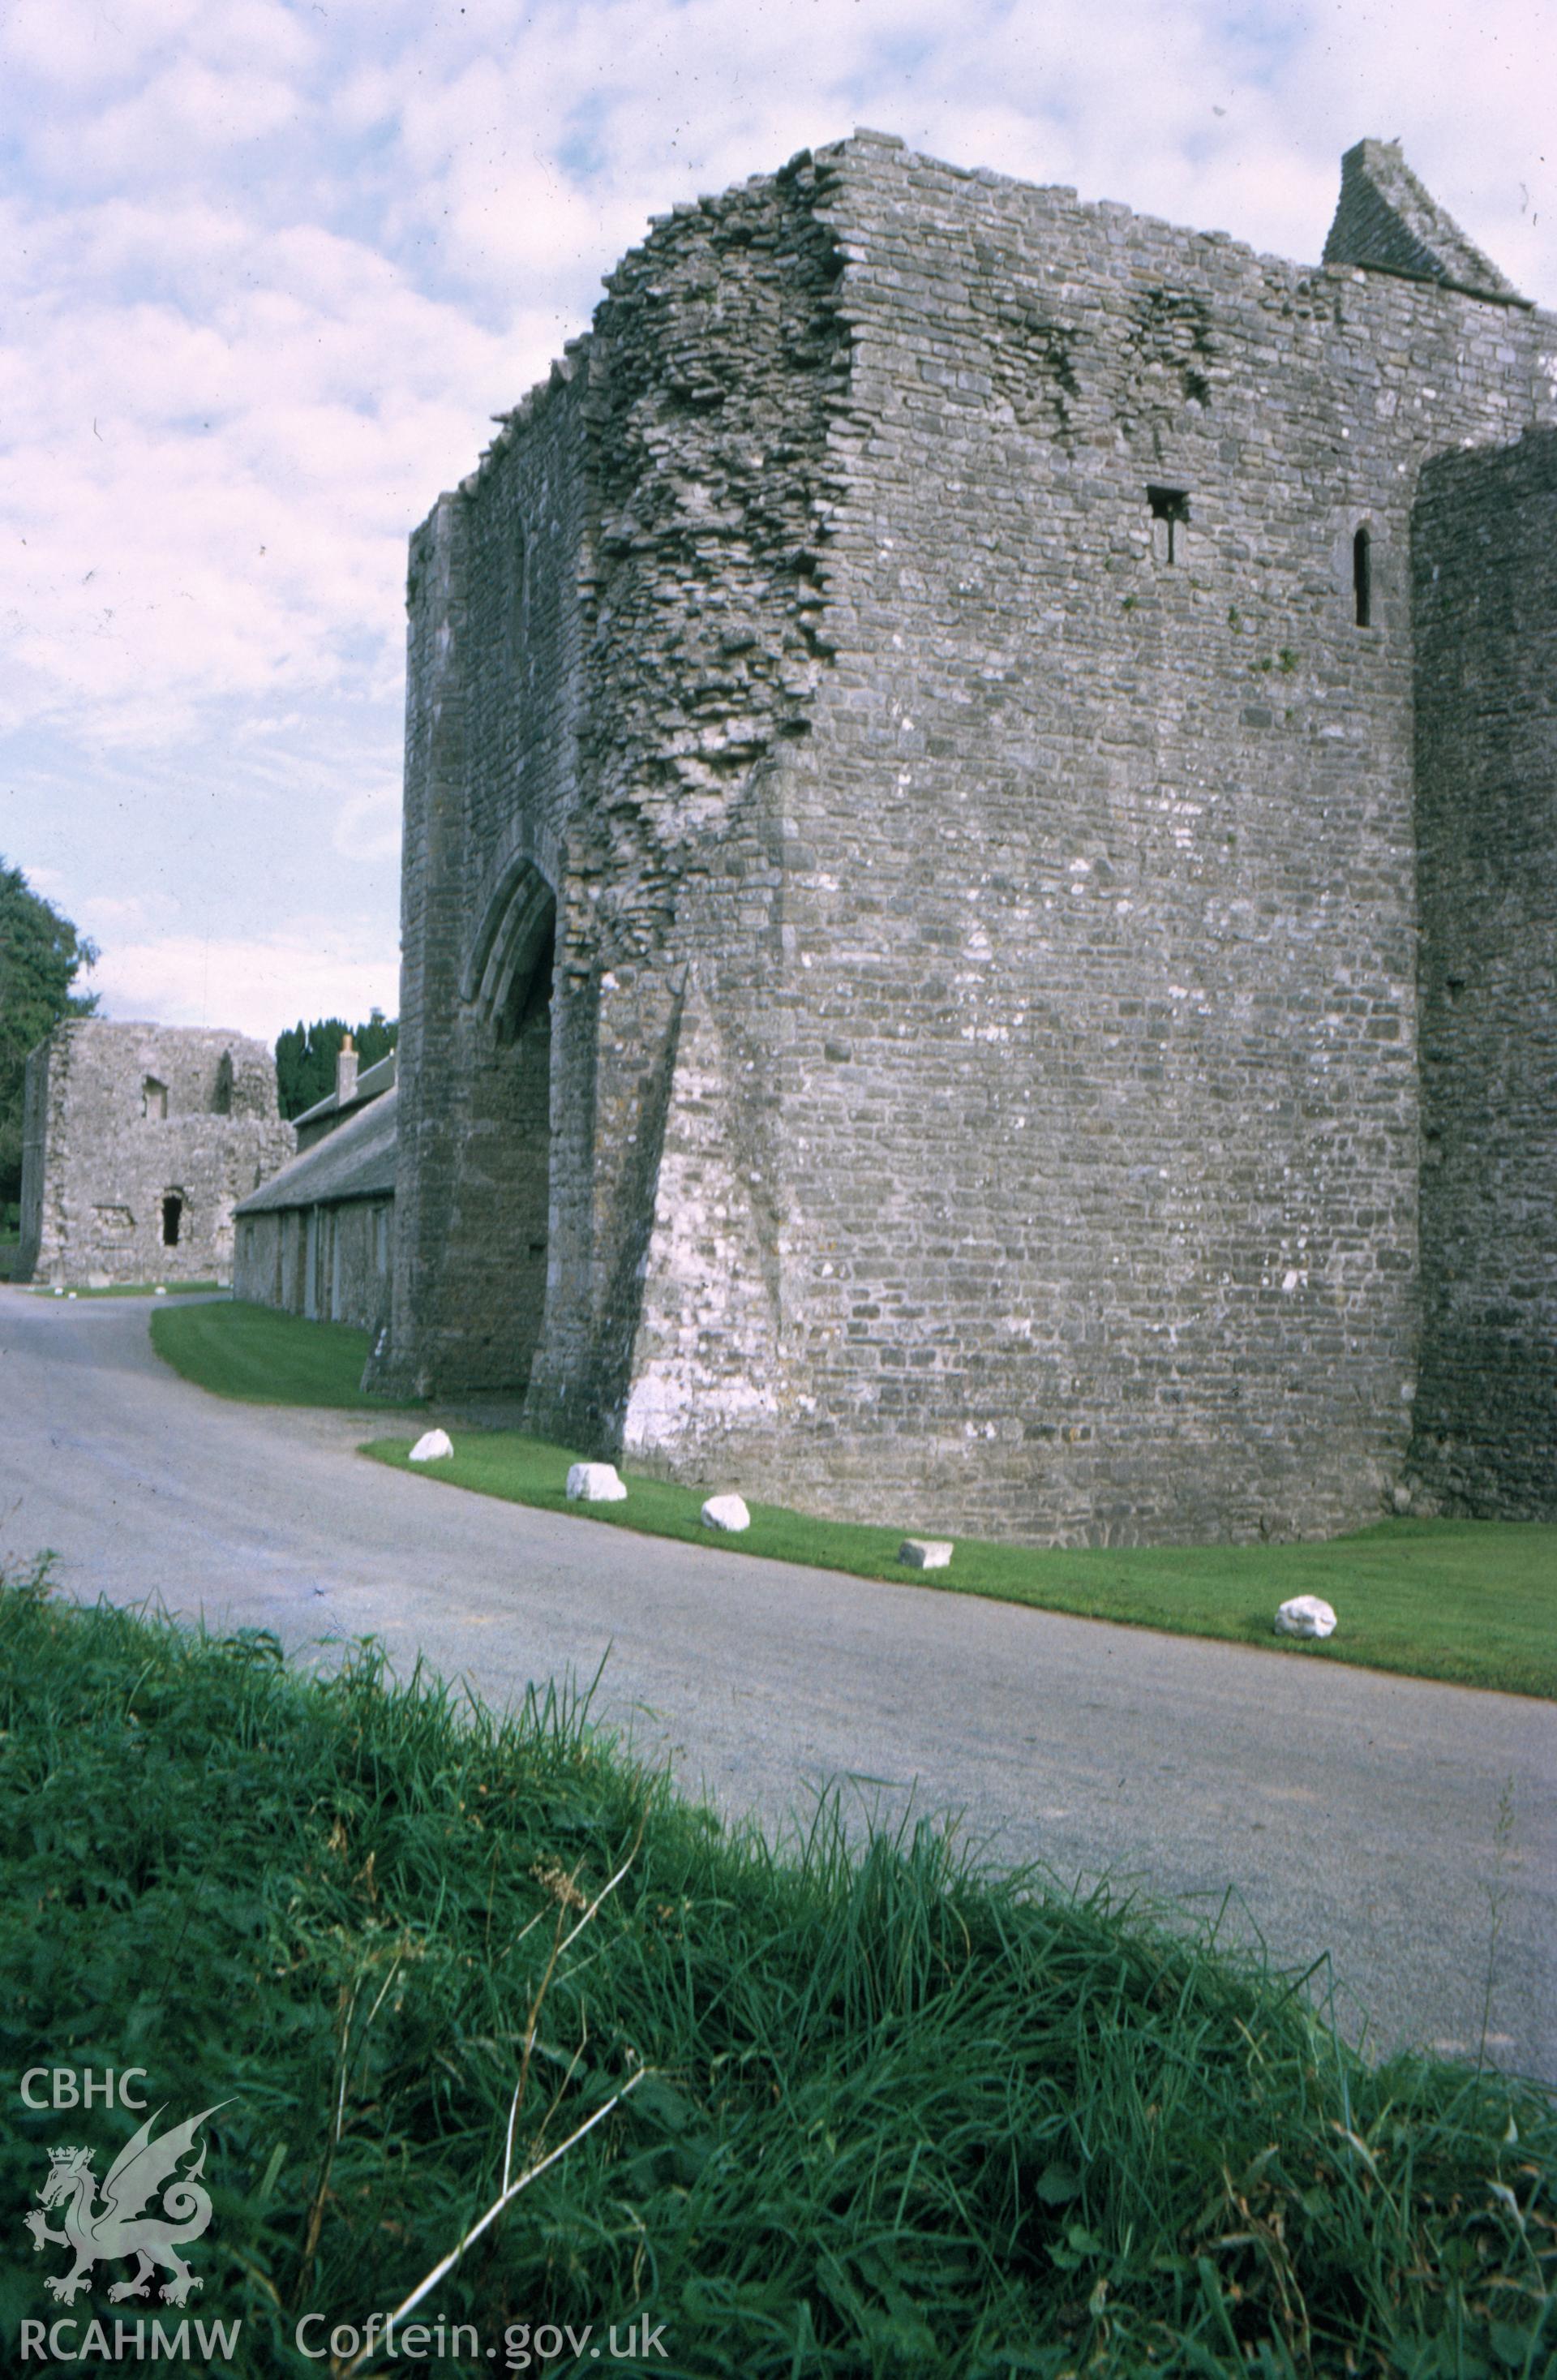 Colour slide of Ewenny Priory, showing the north gate and north curtain.